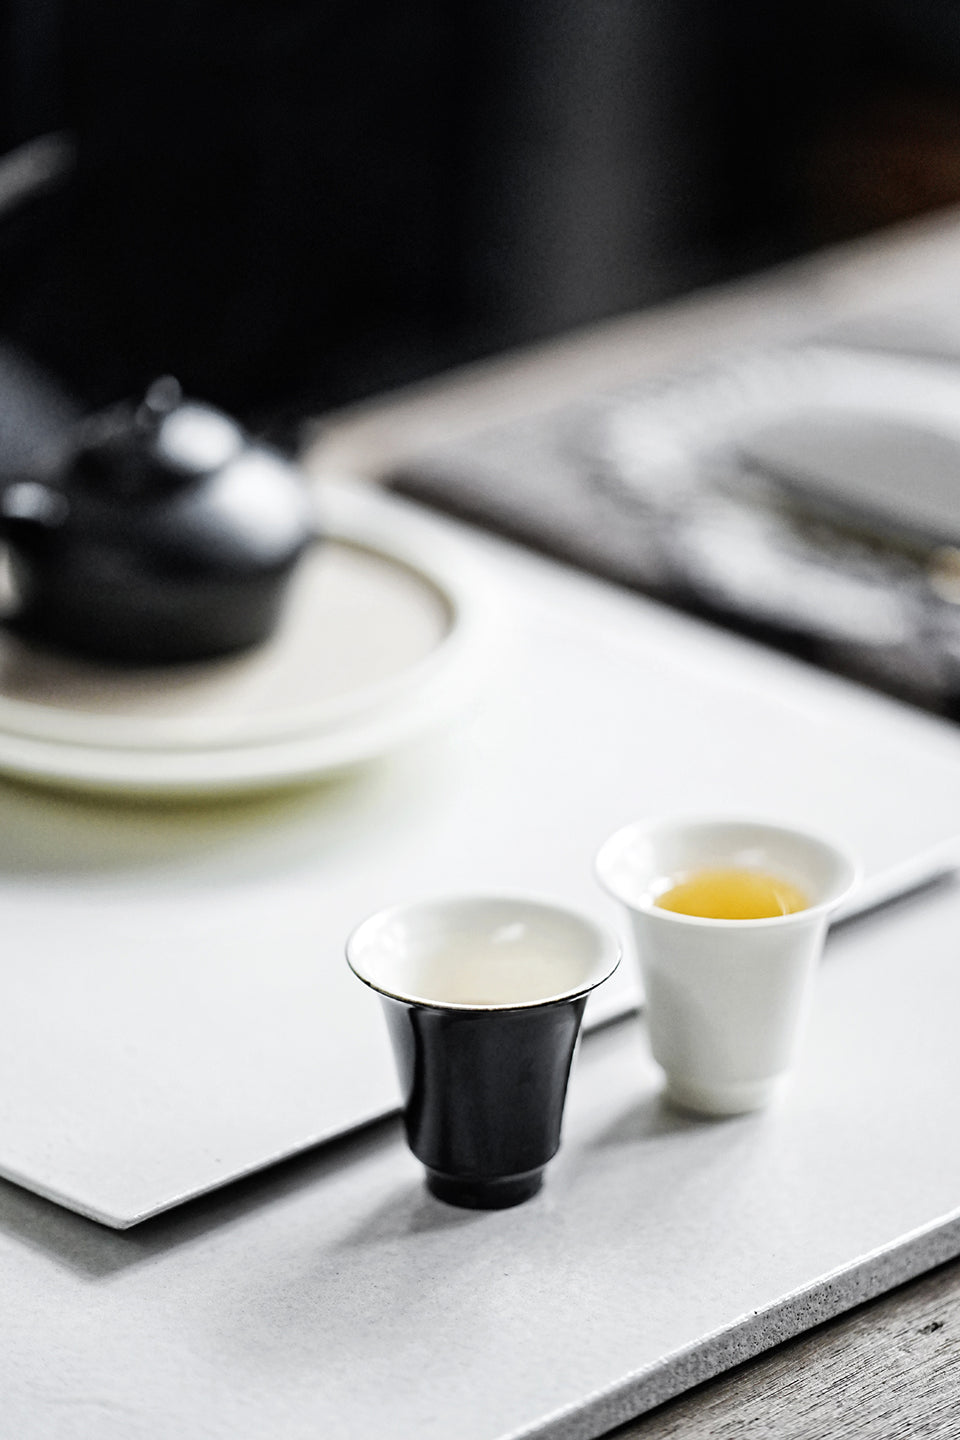 Blcak and White Gongfu Tea cup